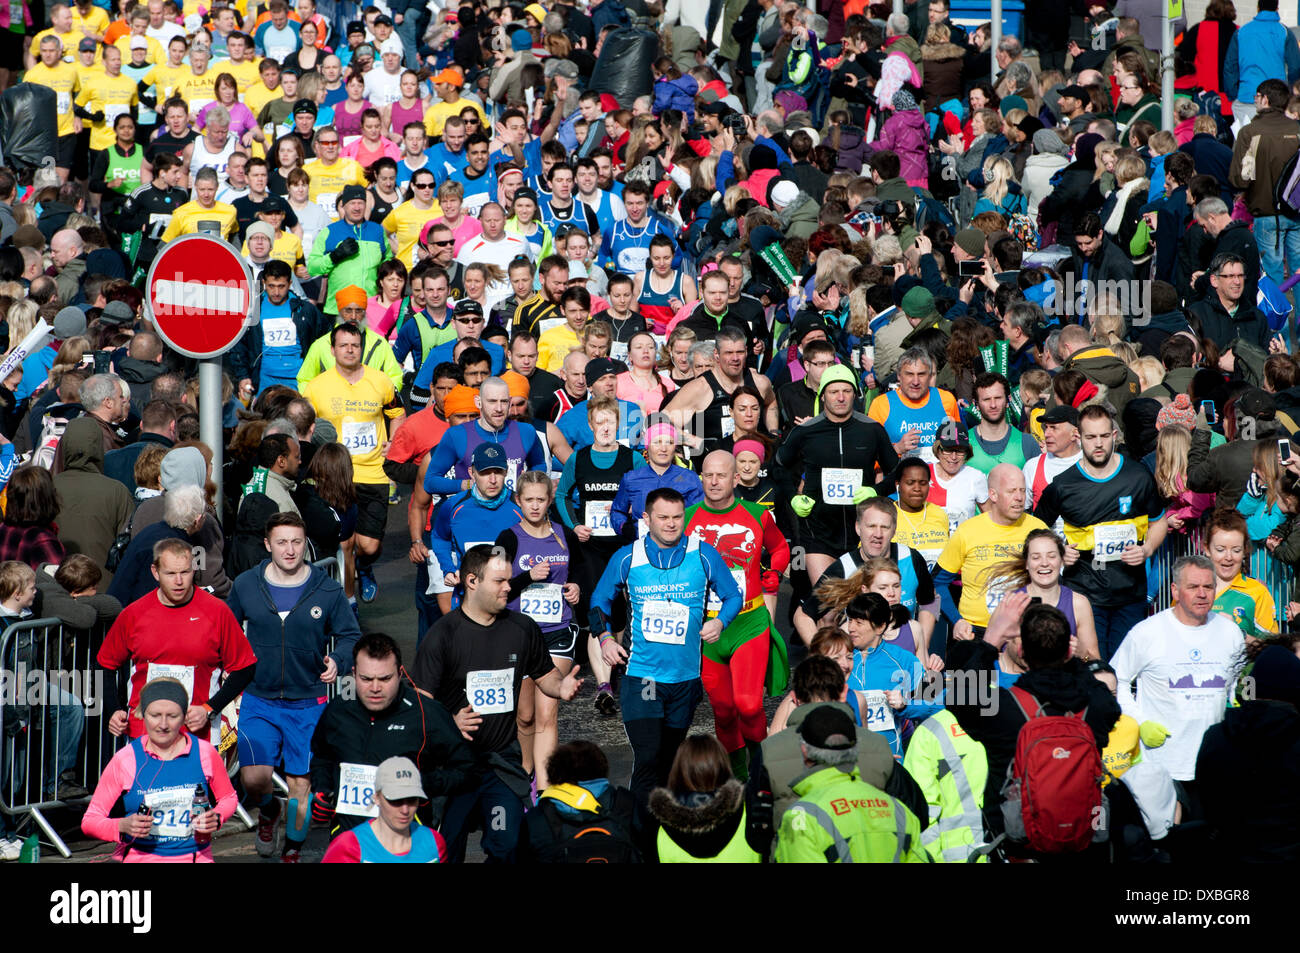 Coventry, West Midlands, England, UK. 23rd March 2014. Runners at the start of the Decathlon Coventry Half Marathon in Coventry city centre. Credit:  Colin Underhill/Alamy Live News Stock Photo